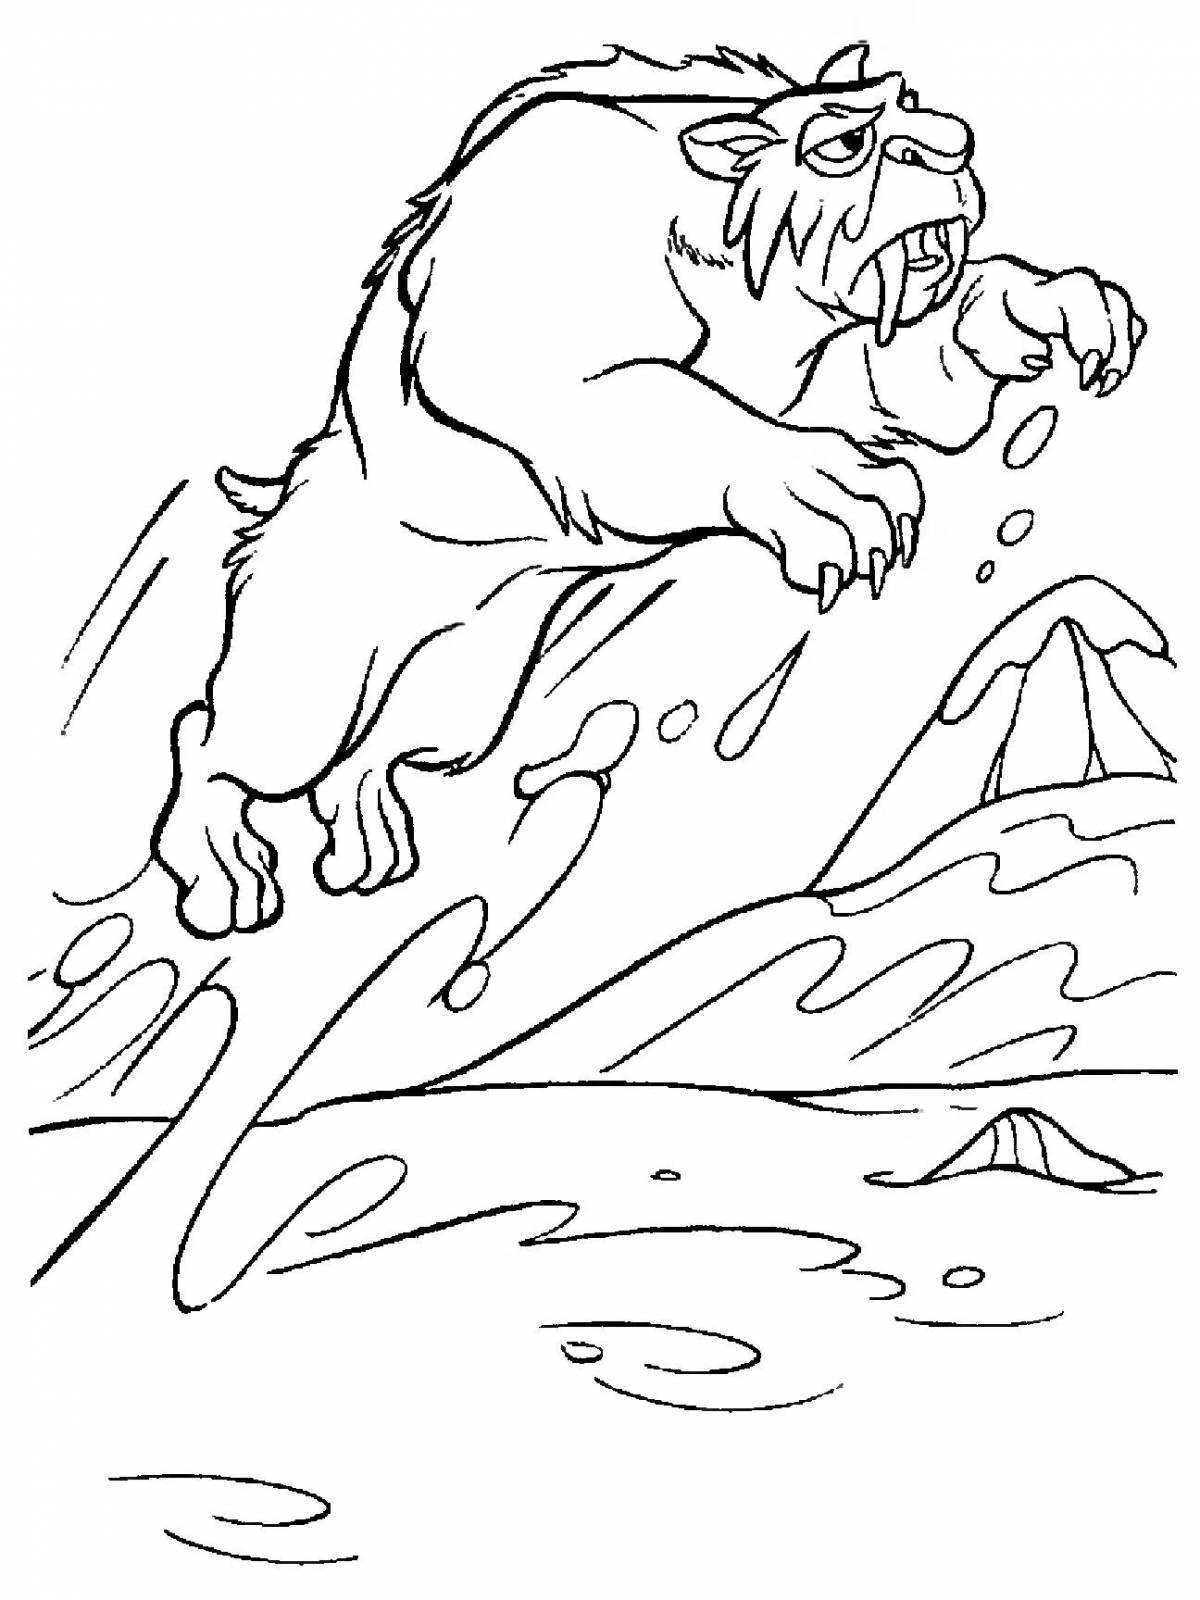 Diego ice age fantasy coloring page